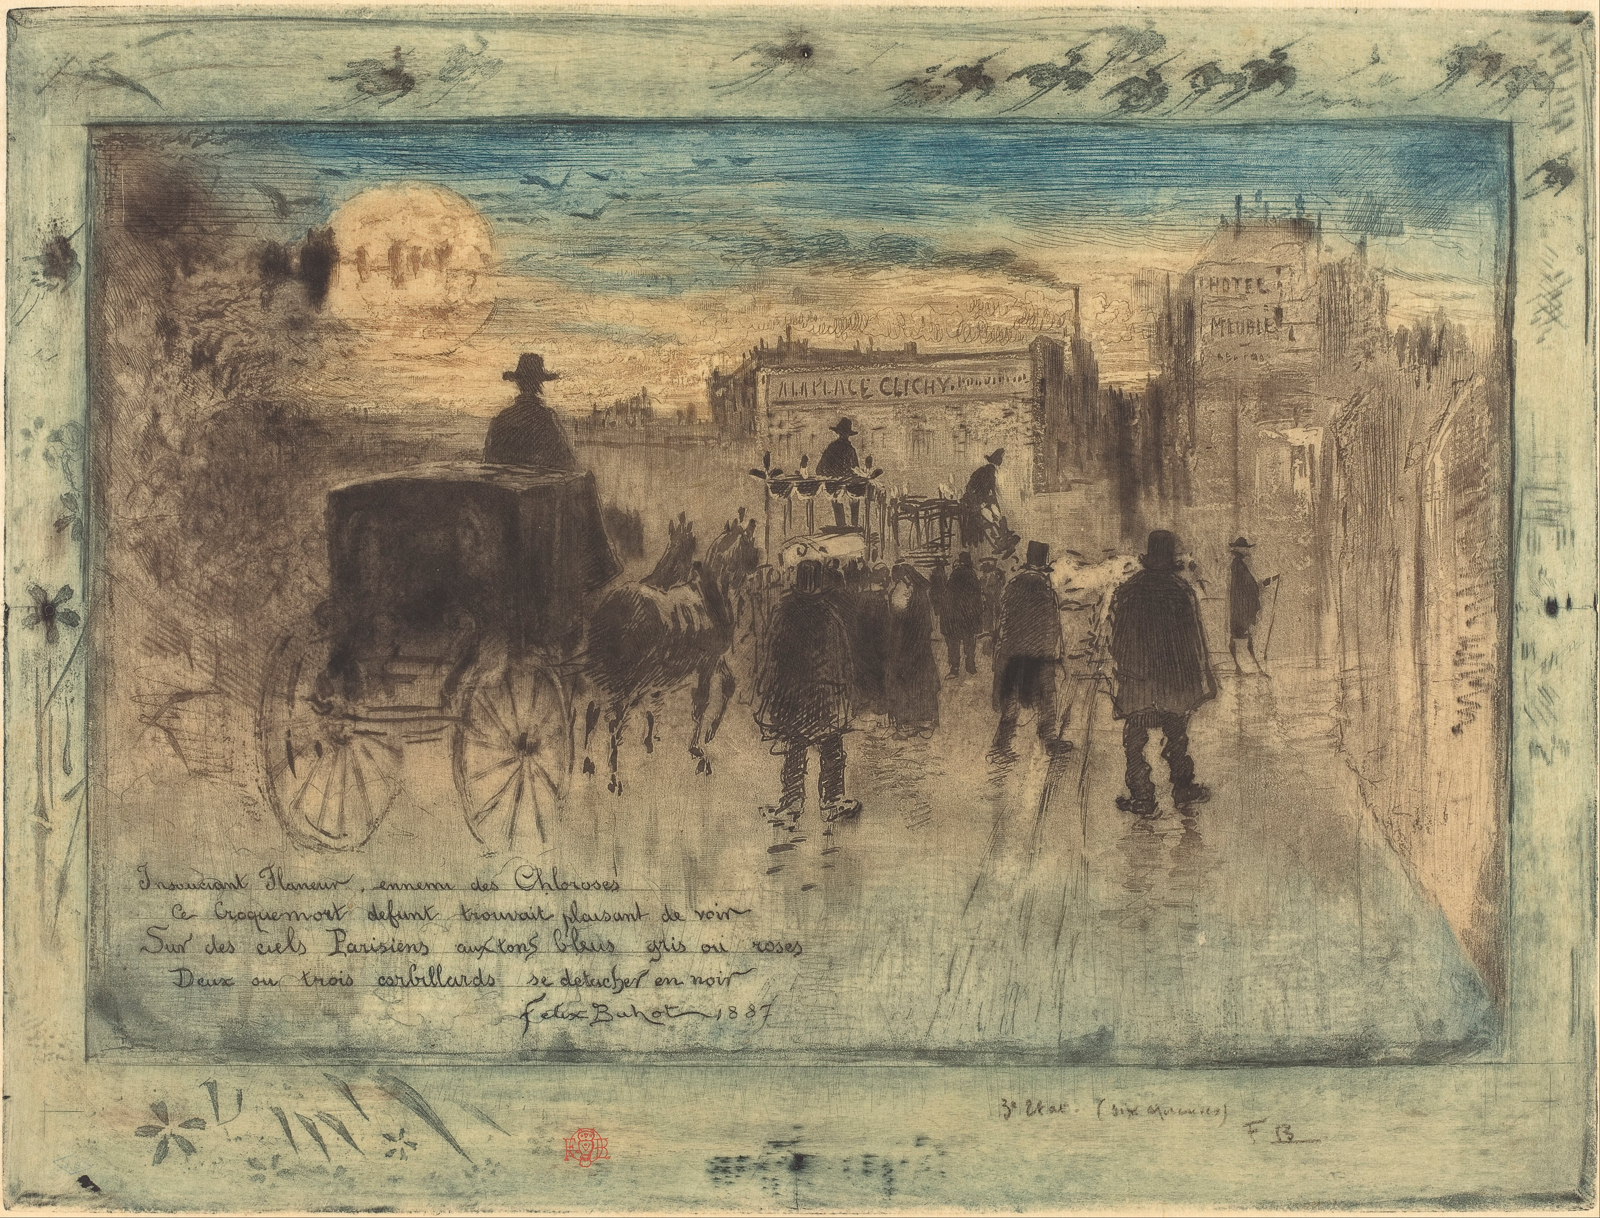 Félix Buhot, Convoi Funèbre au Boulevard de Clichy (Funeral Procession on the Boulevard de Clichy), 1887, etching, drypoint, aquatint, roulette, soft ground, and lift ground over heliogravure, second state of three, 14 1/8 x 19 inches. Private collection